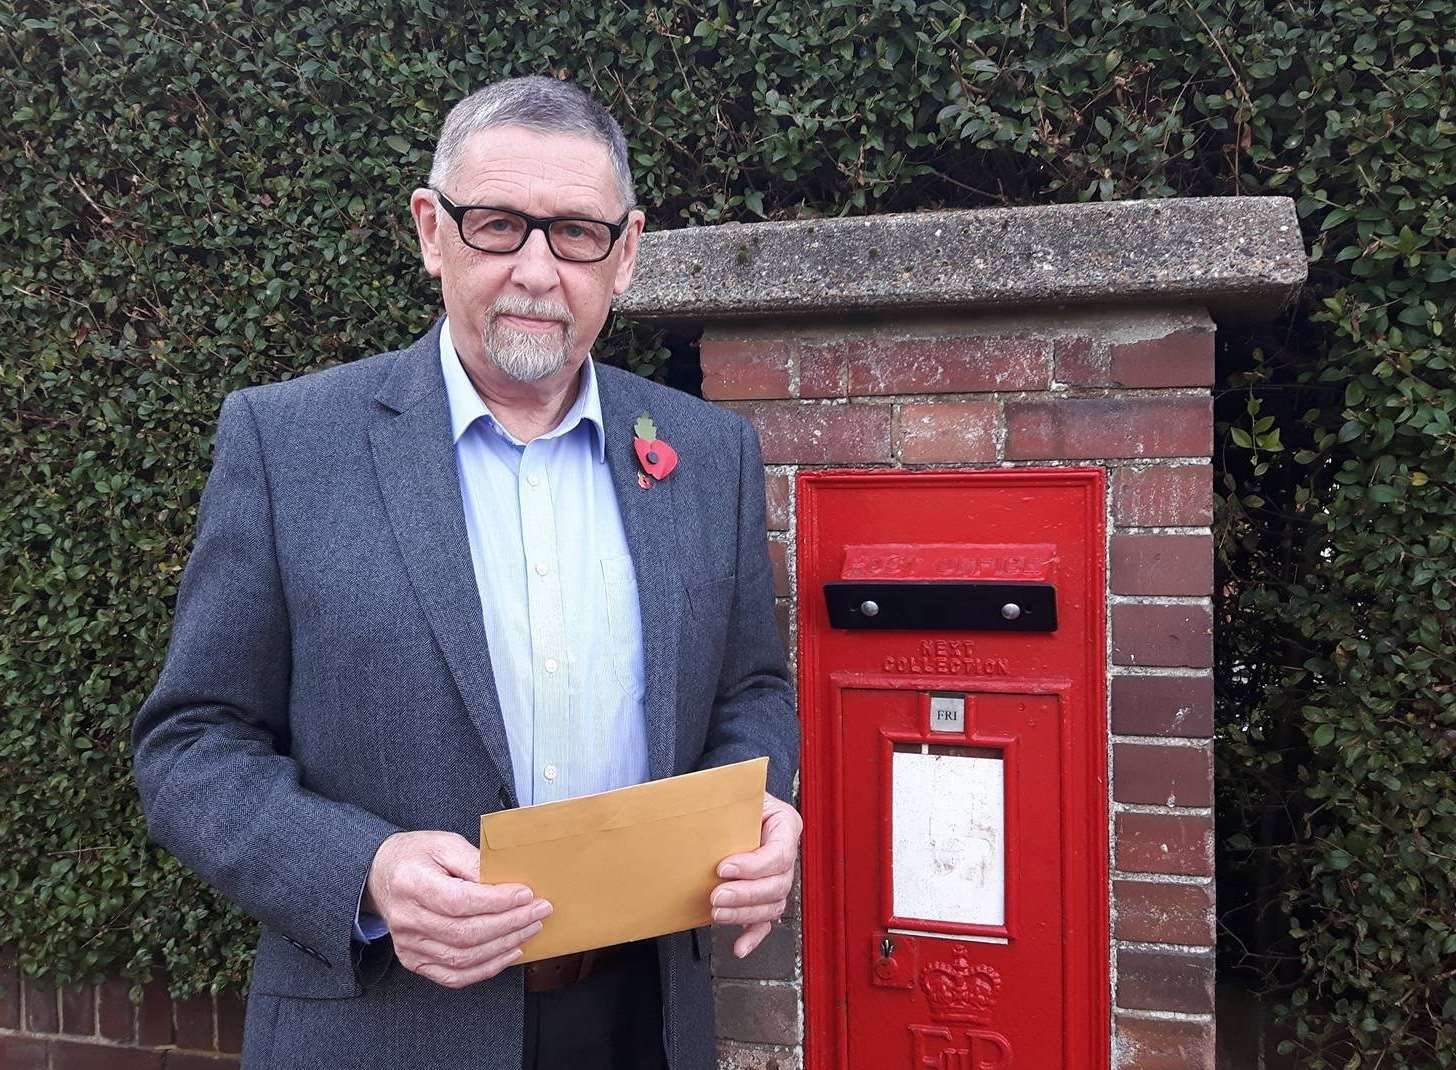 Cllr Nick Tomaszewski has condemned those who posted dog faeces in this post box